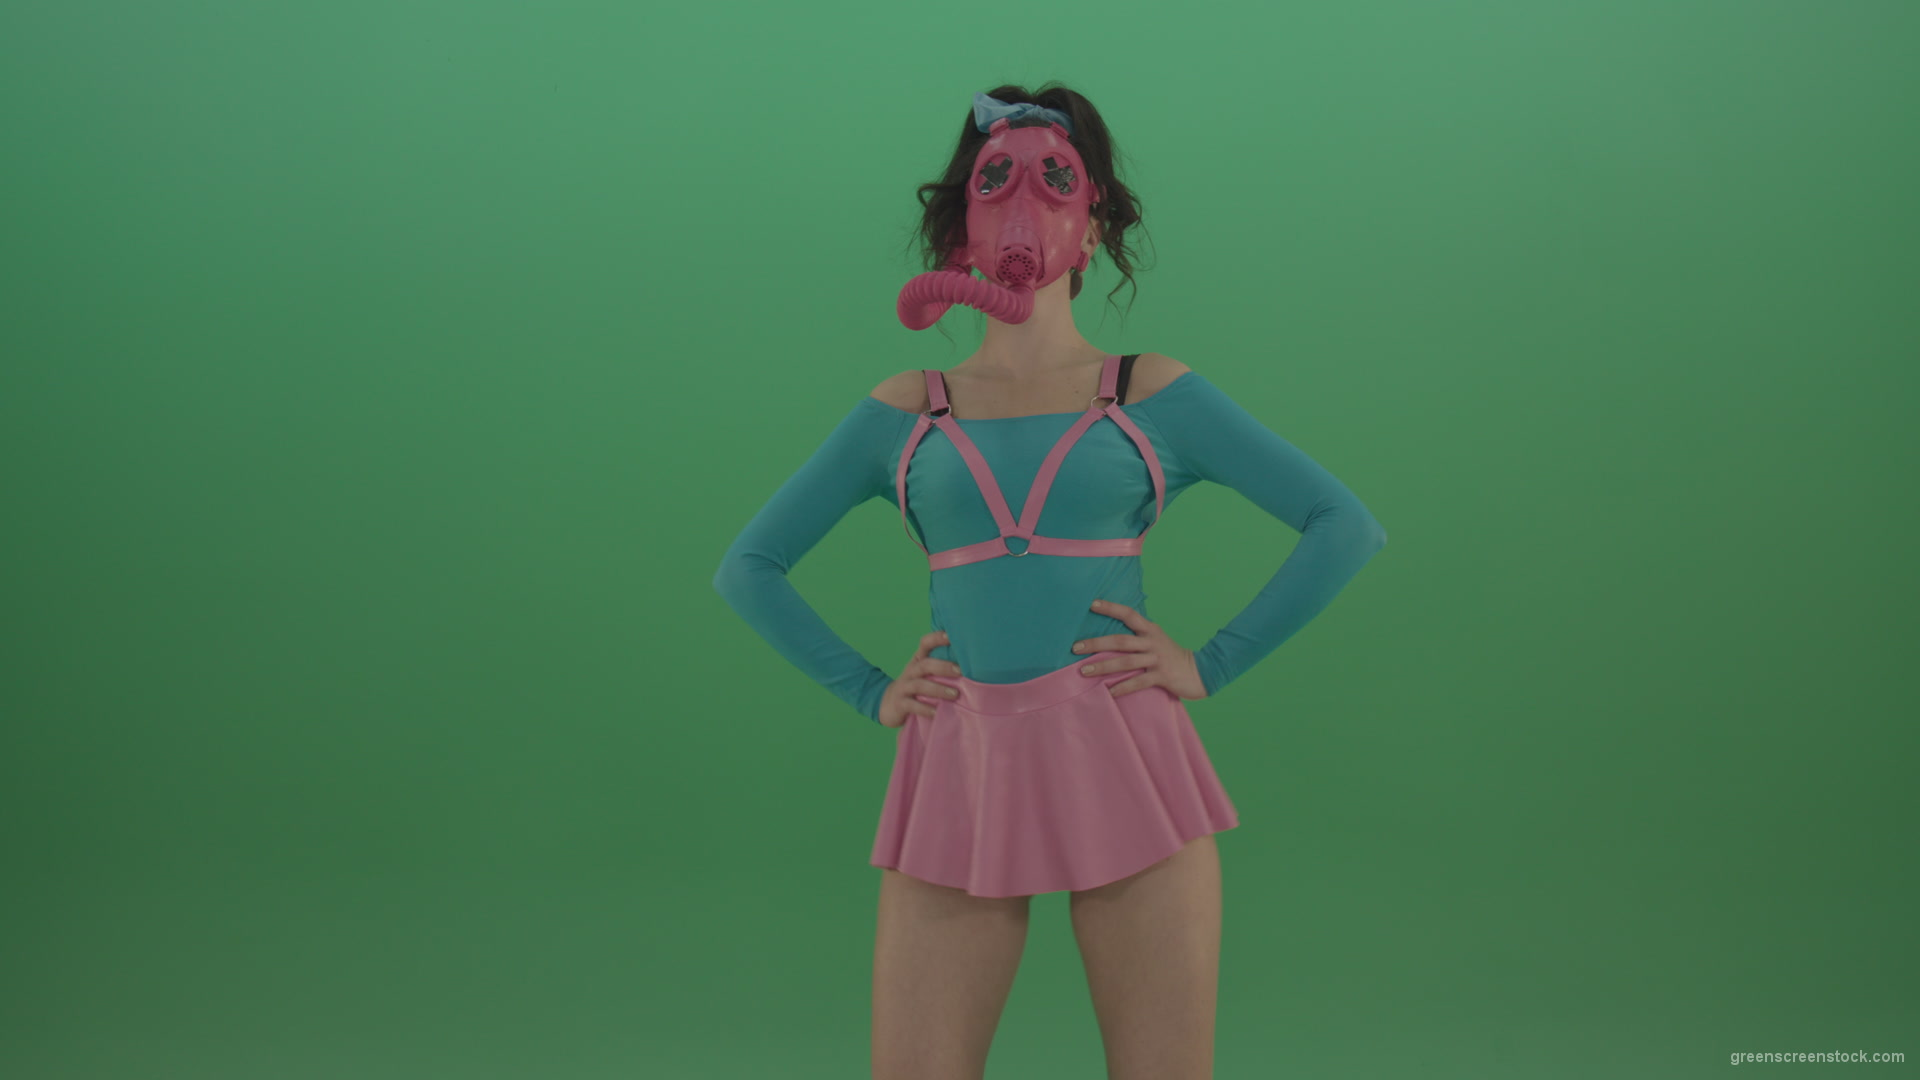 Beautiful-erotic-dance-from-a-woman-in-a-mask-in-a-pink-suit-on-green-background_006 Green Screen Stock